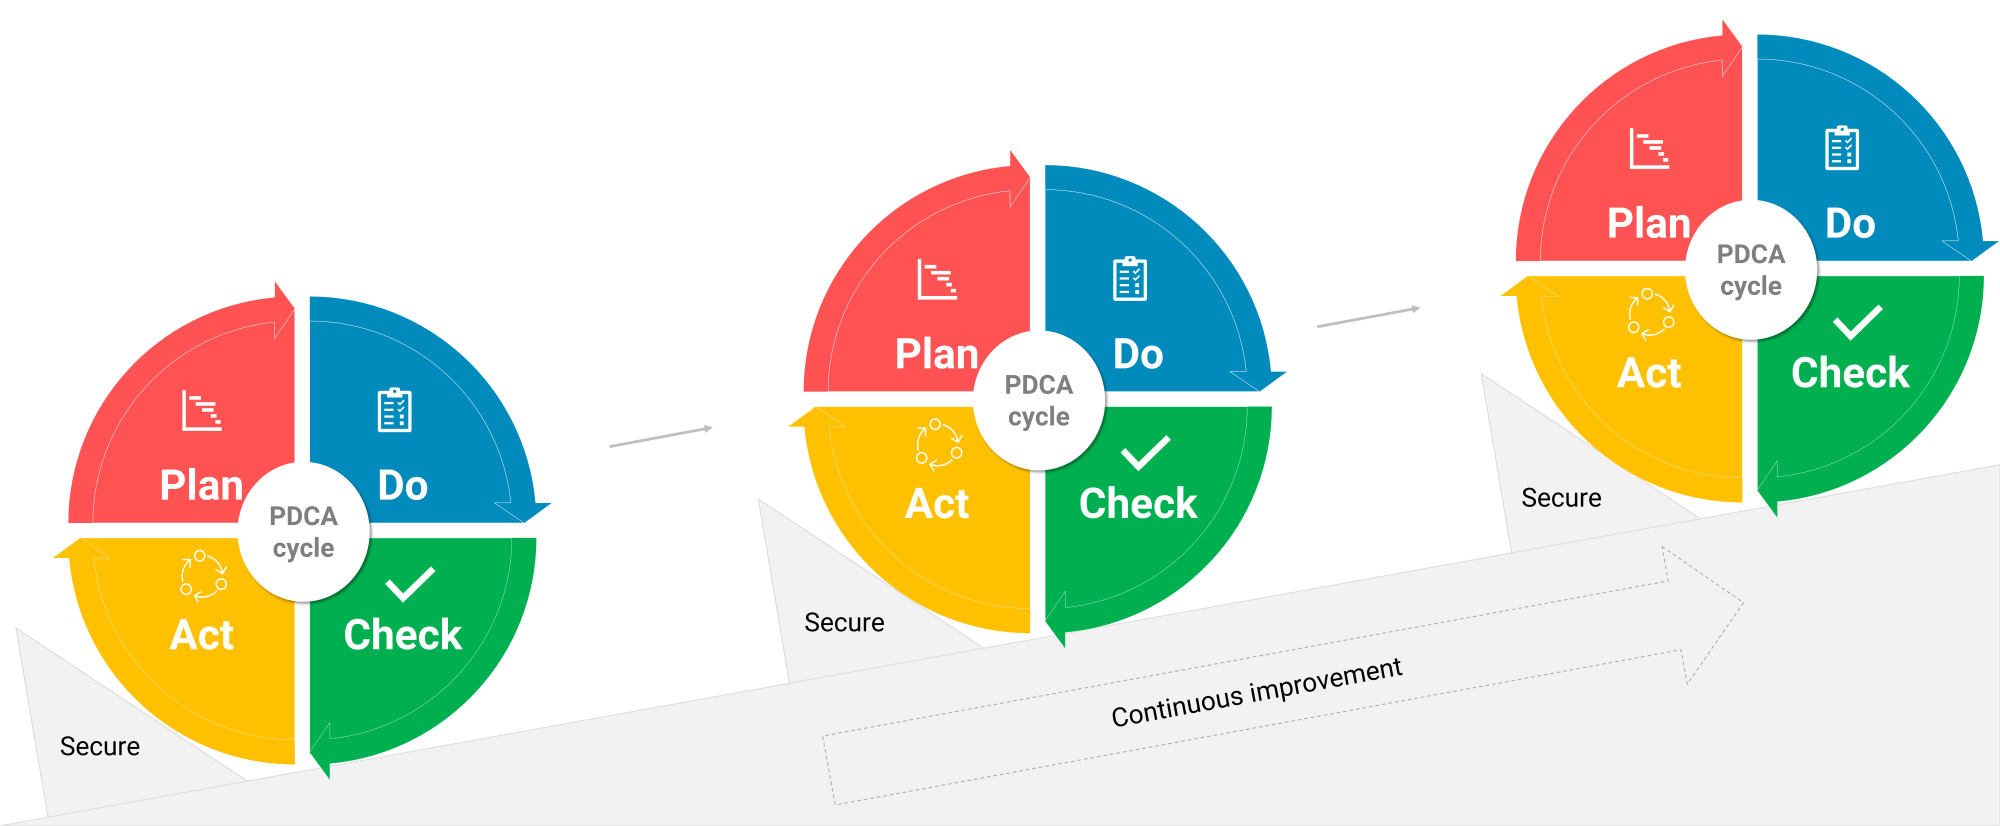 PDCA cycle continuous improvement